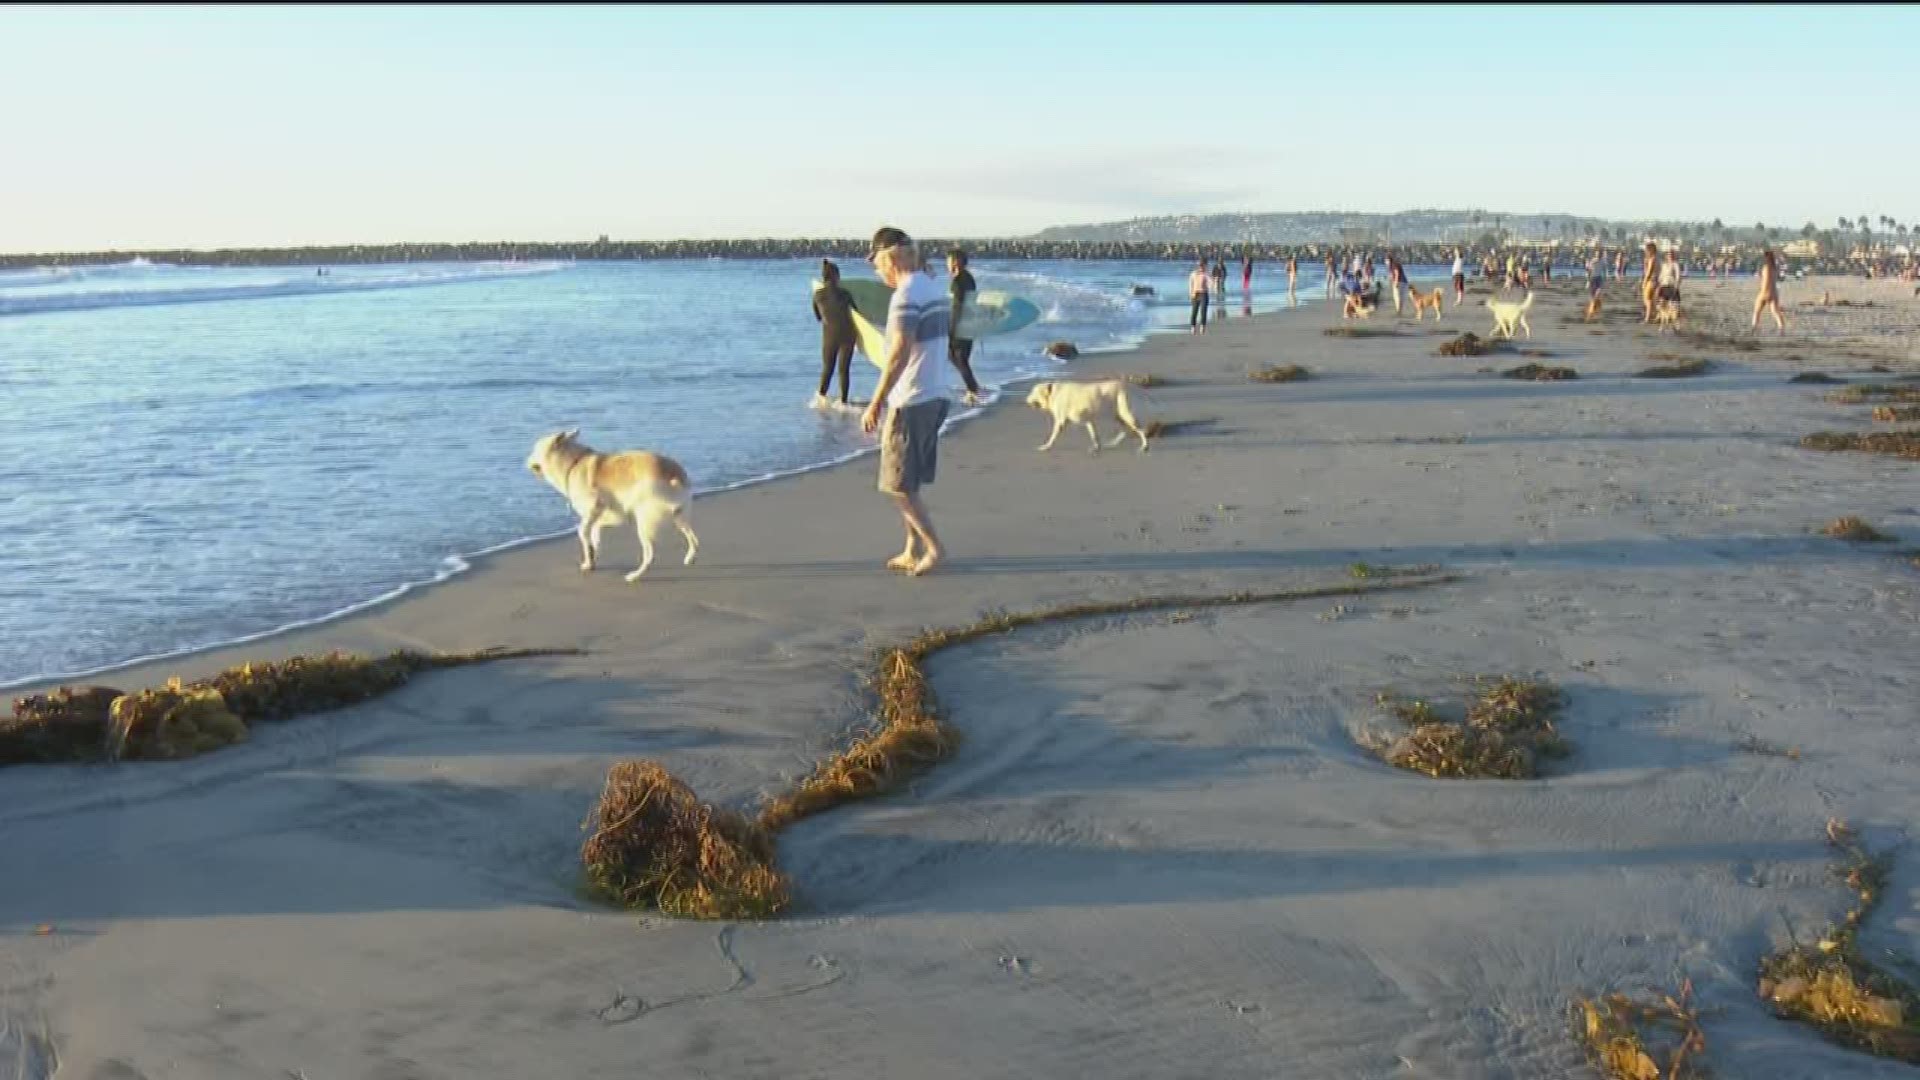 The San Diego County Department of Public Health on Tuesday issued an advisory for high bacterial levels at the San Diego River outlet at Dog Beach in Ocean Beach.